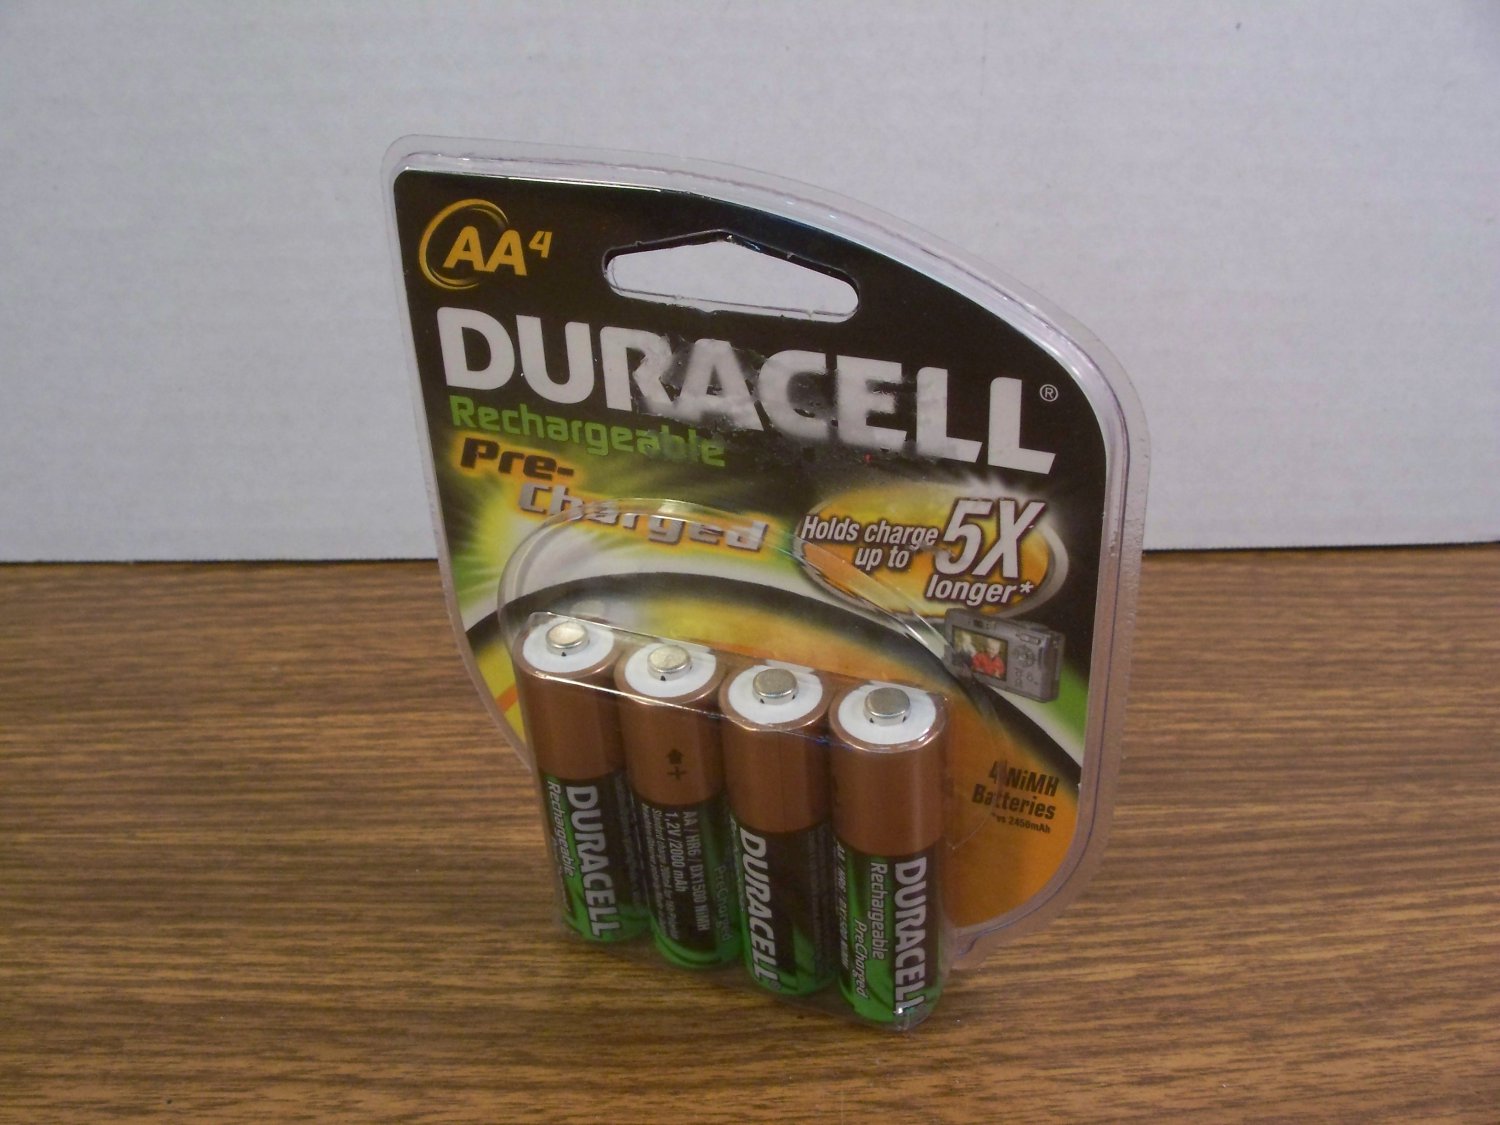 rechargeable aaa duracell batteries